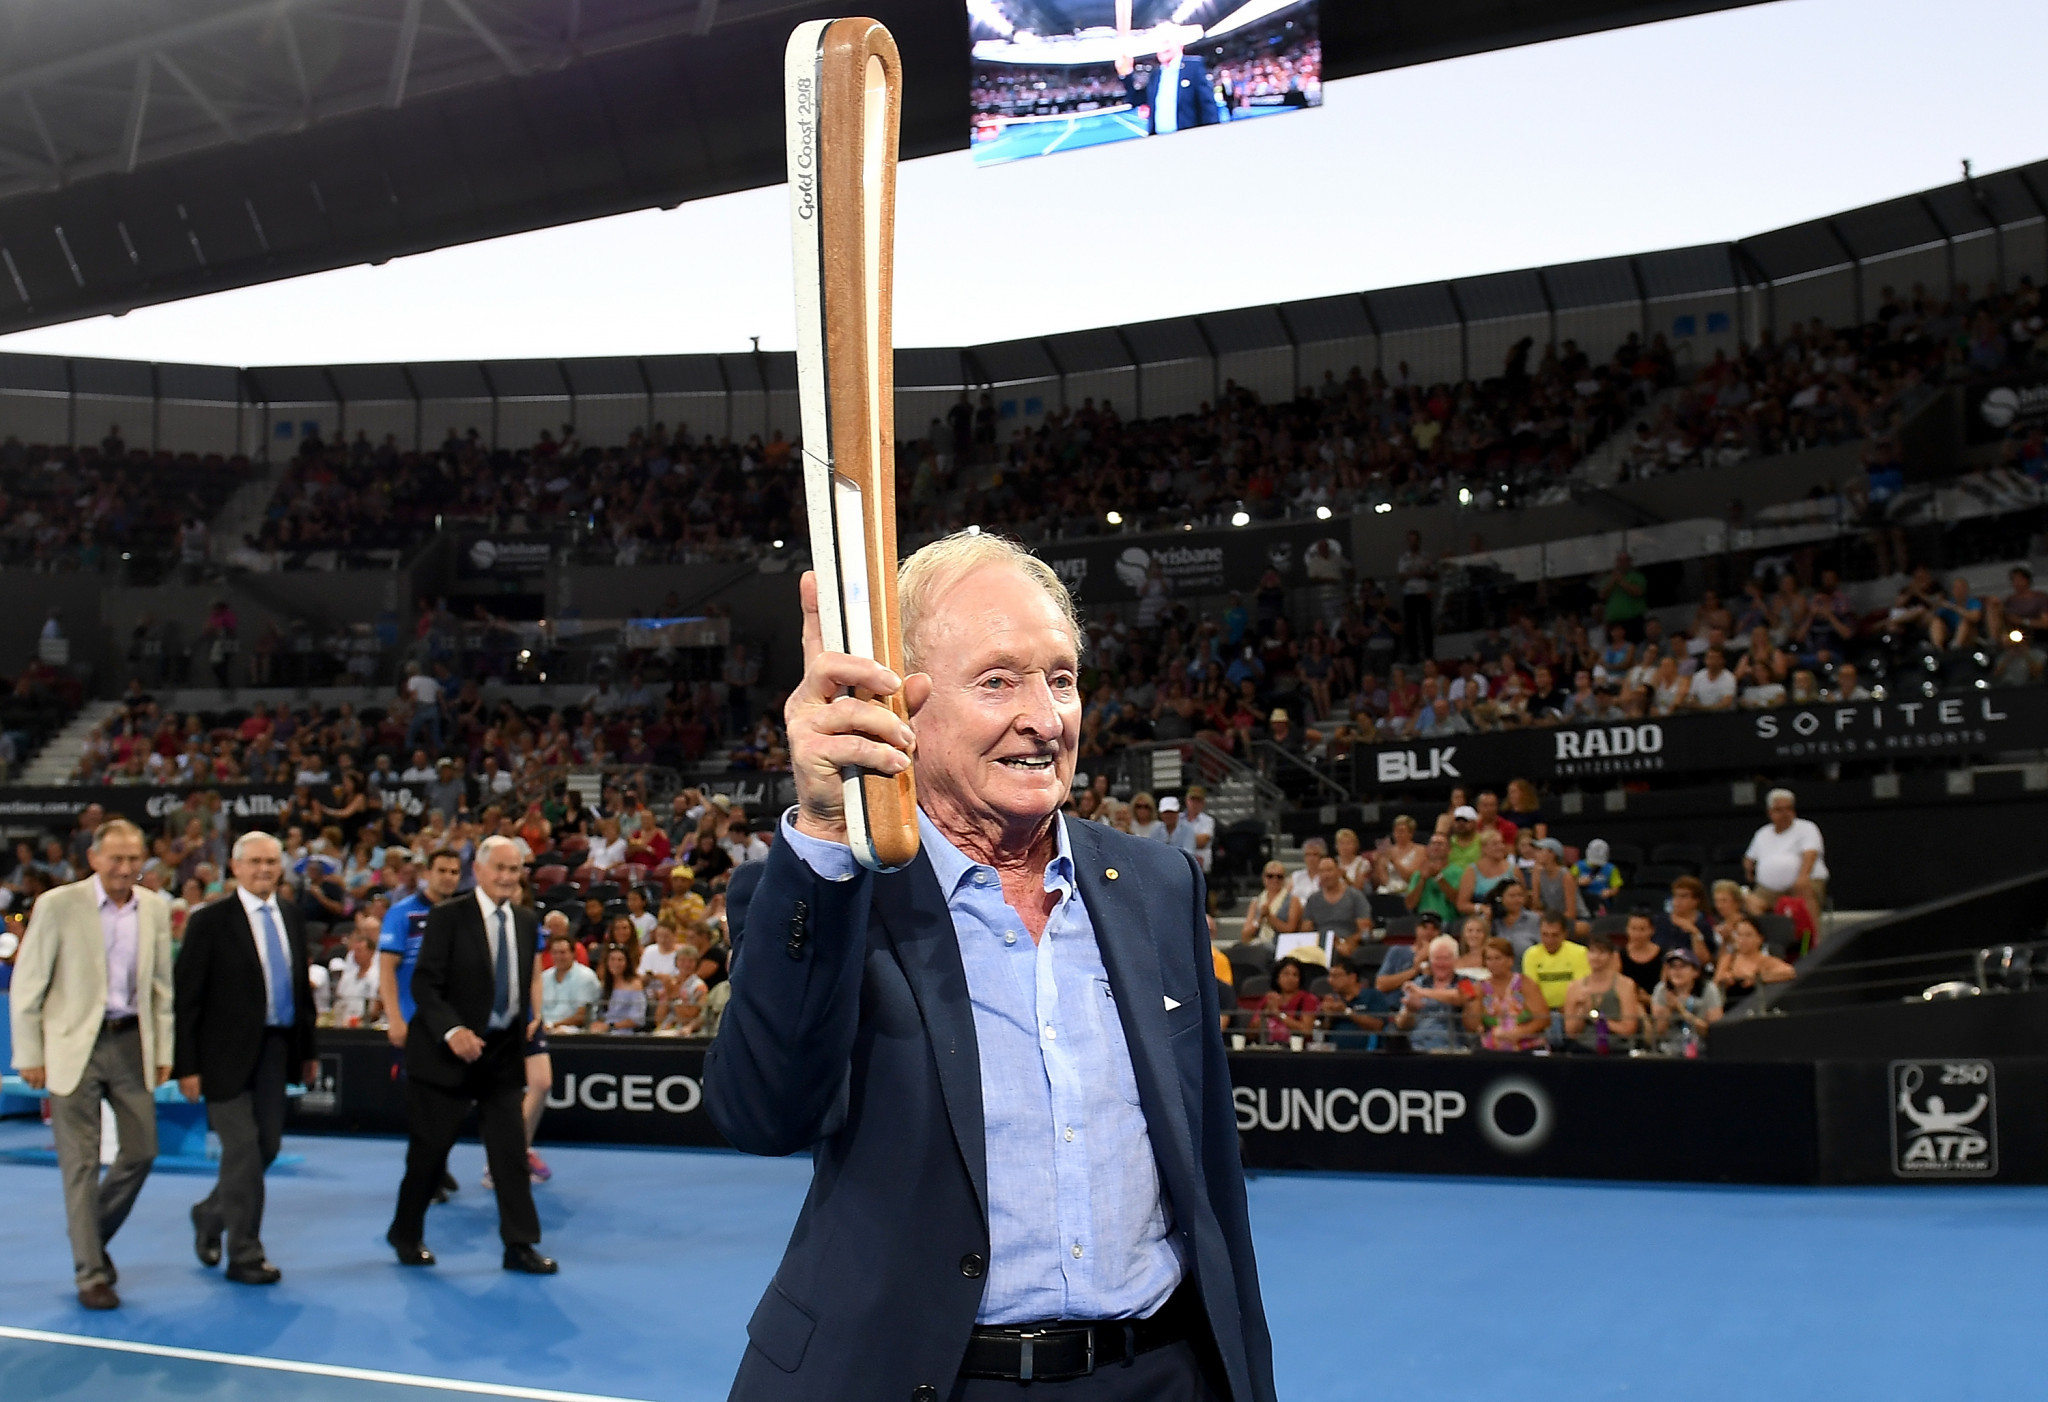 Rod Laver carried the Queen's Baton before the men's singles final at the Brisbane International ©Gold Coast 2018